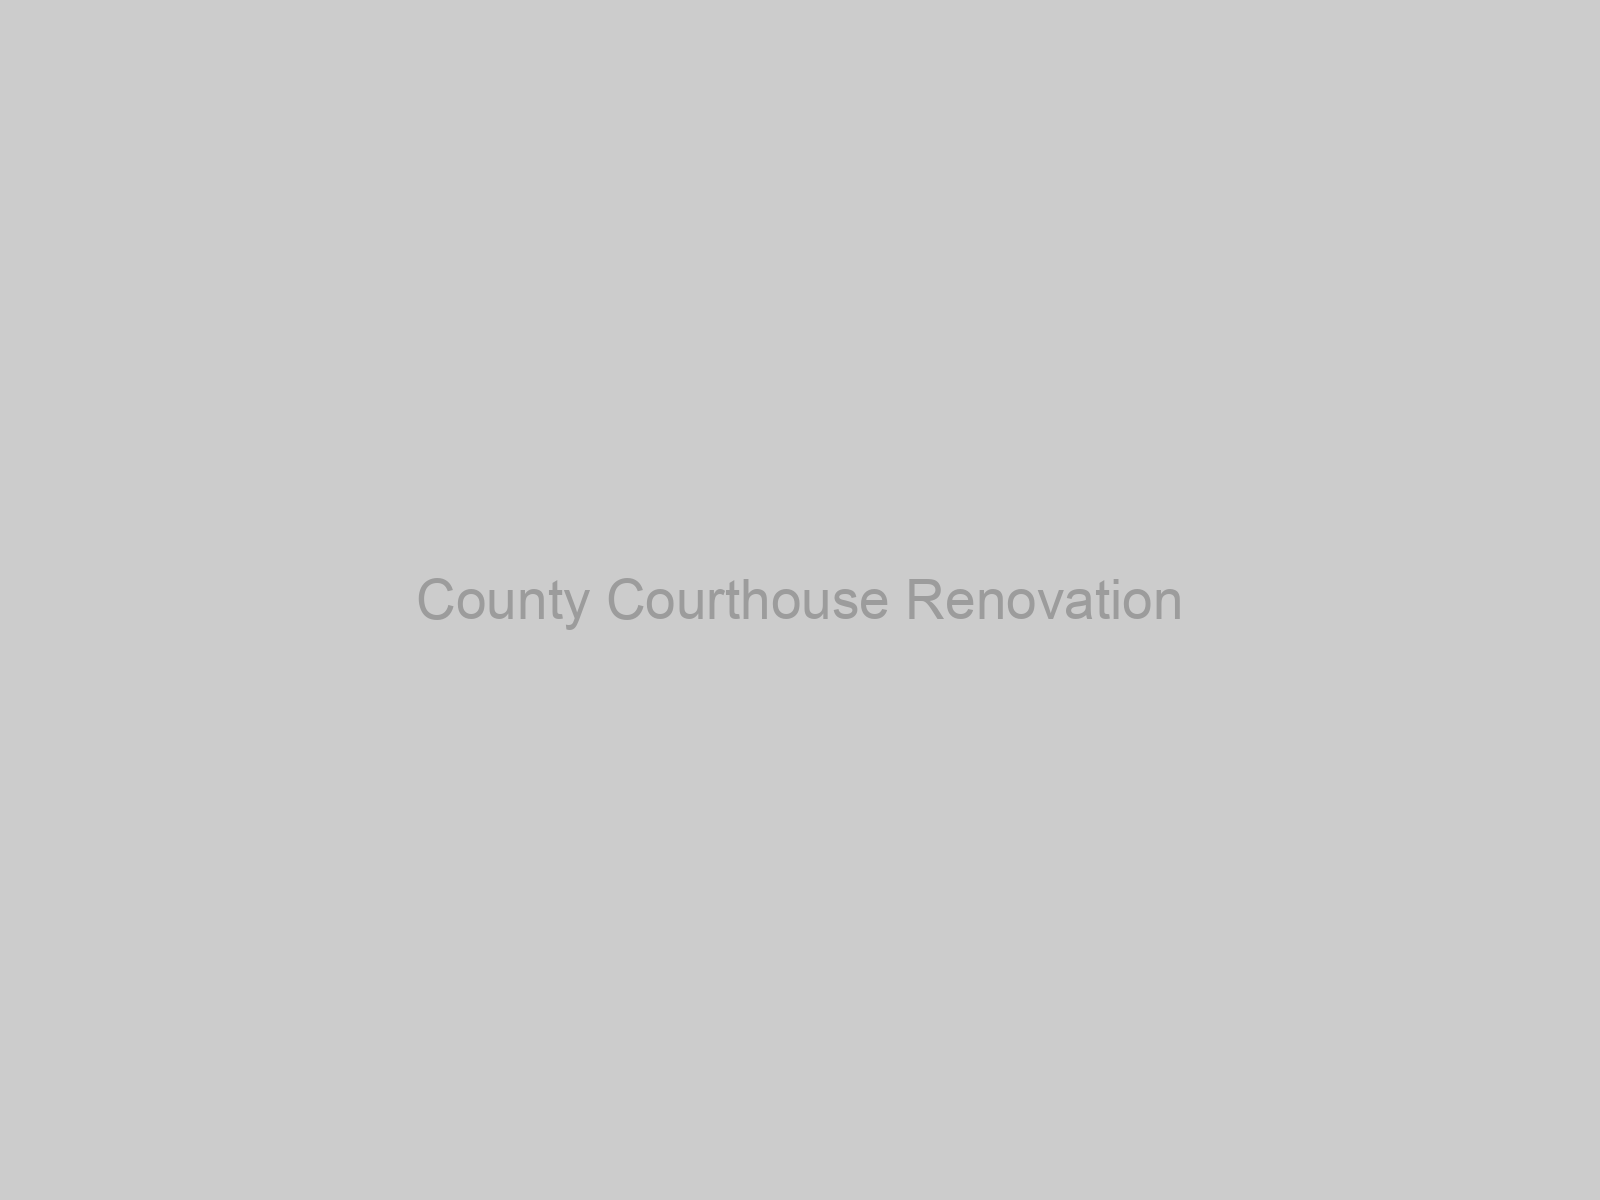 County Courthouse Renovation